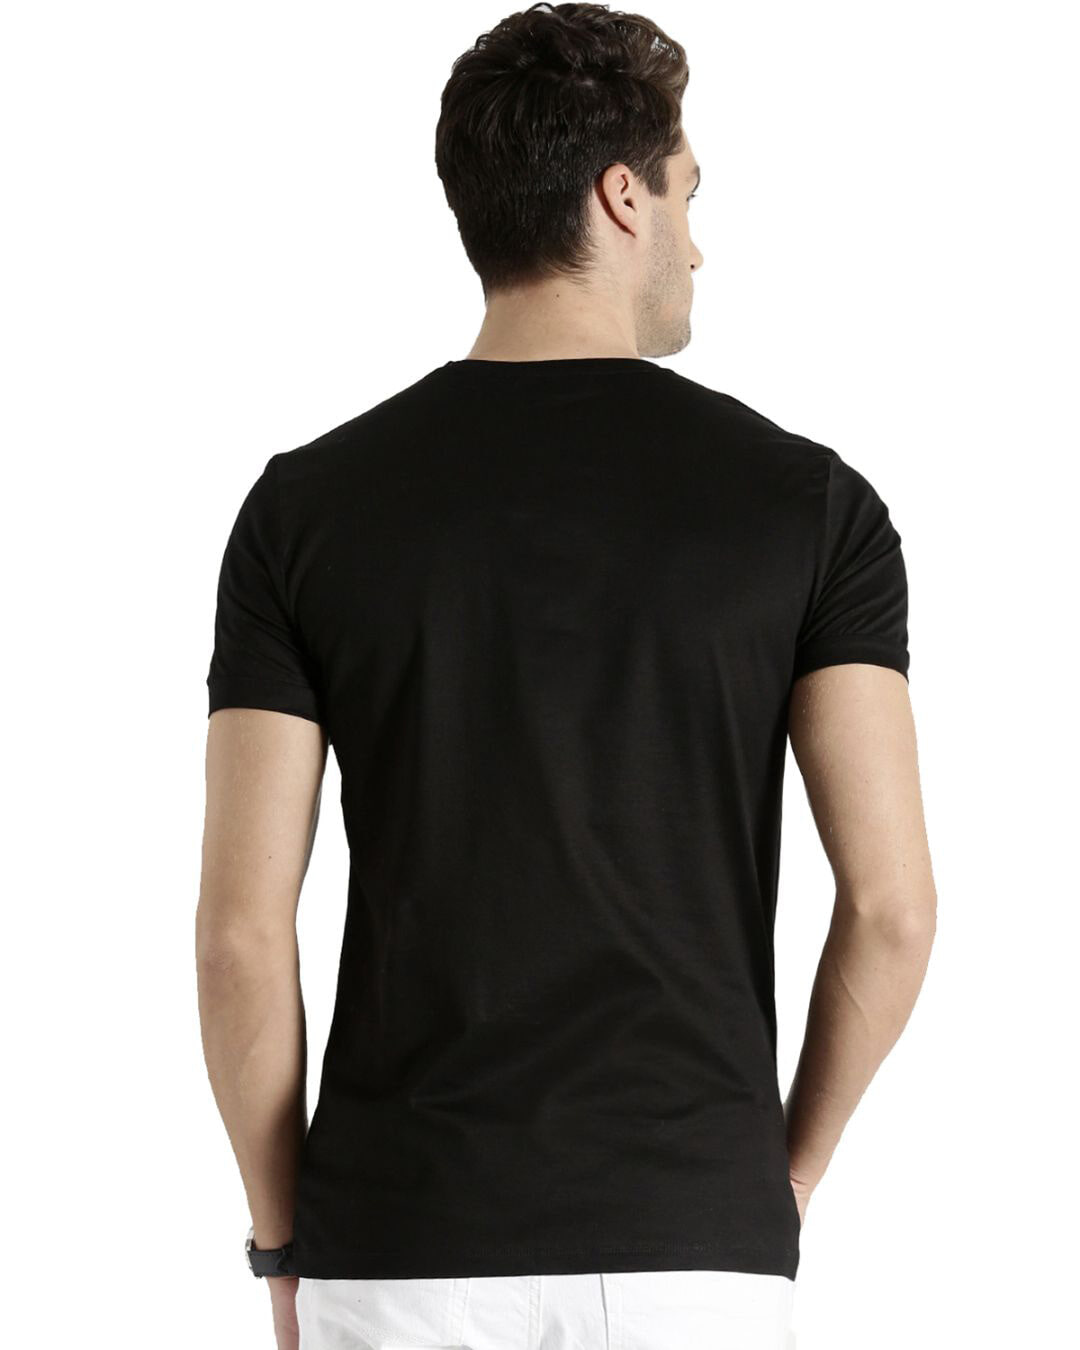 Shop Be Yourself Printed T-shirt For Men's-Back